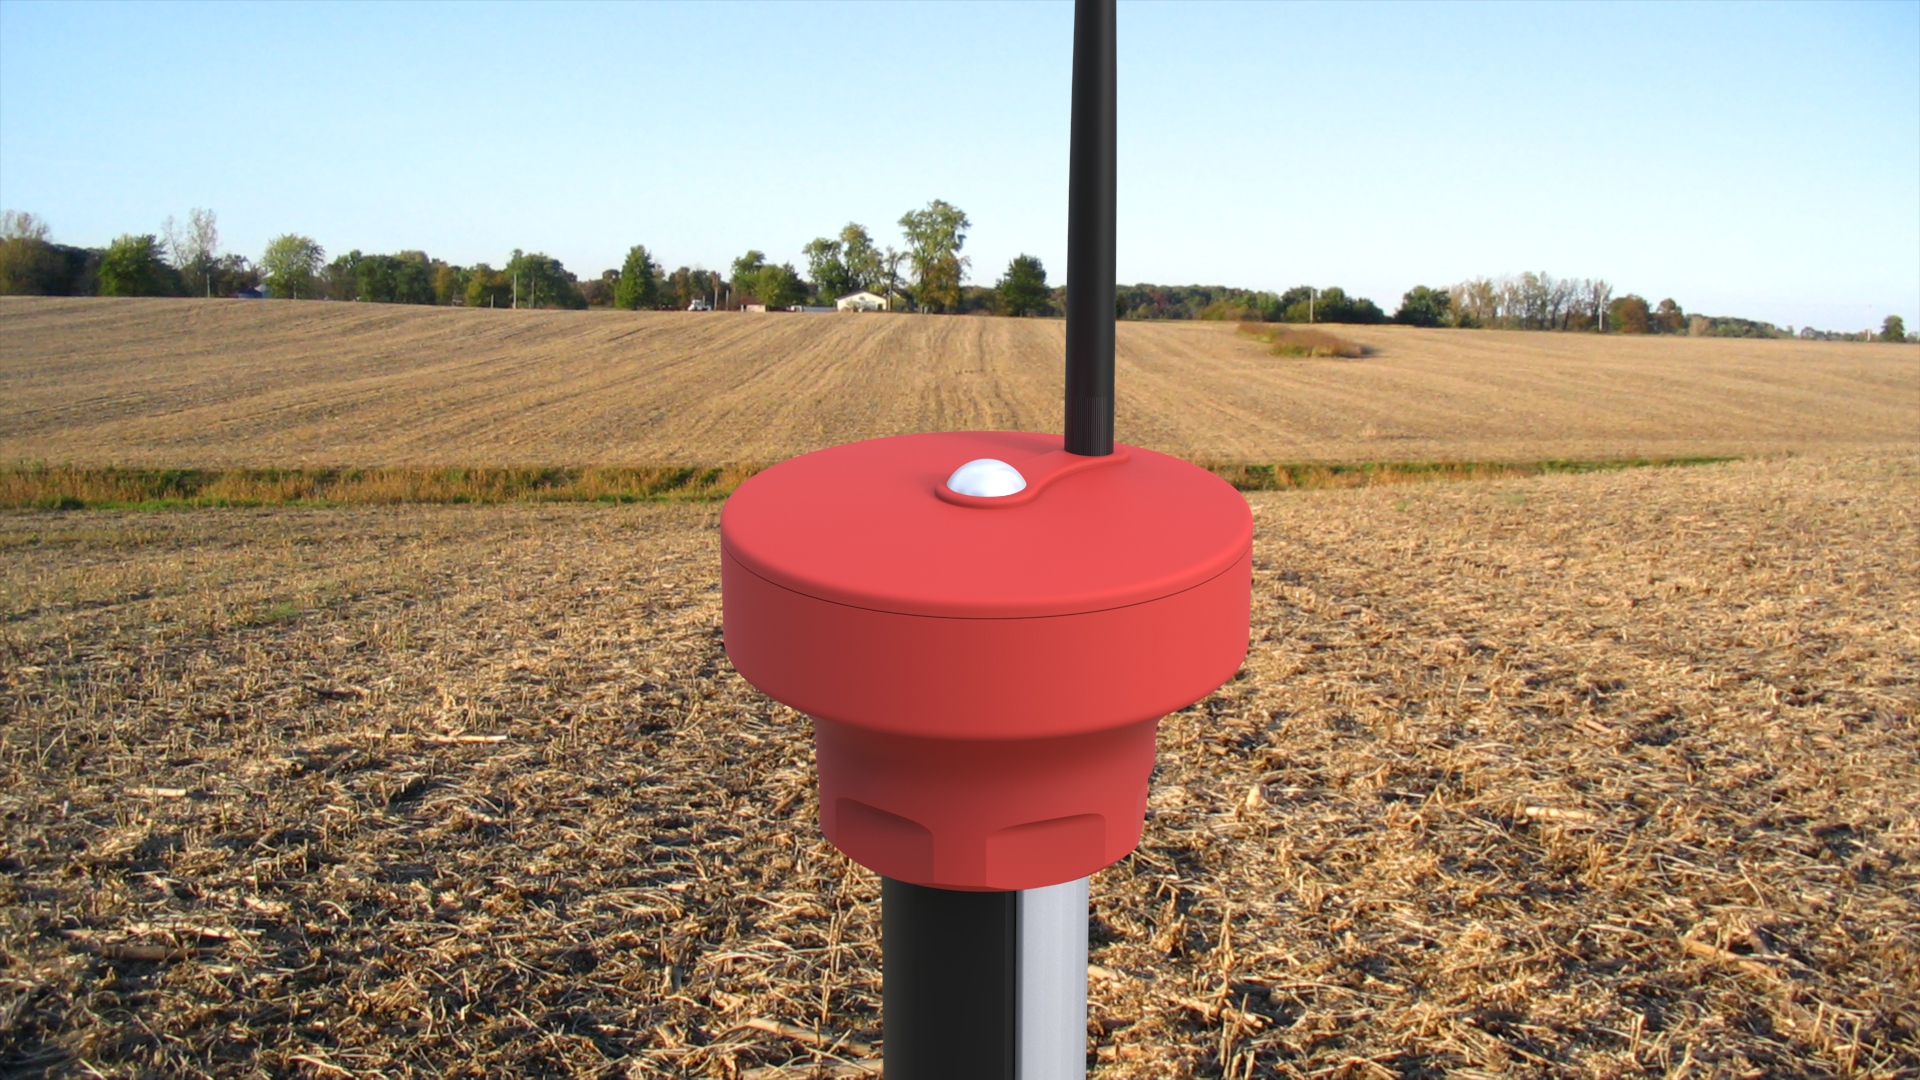 Teralytic - Bringing IoT to Big Agriculture